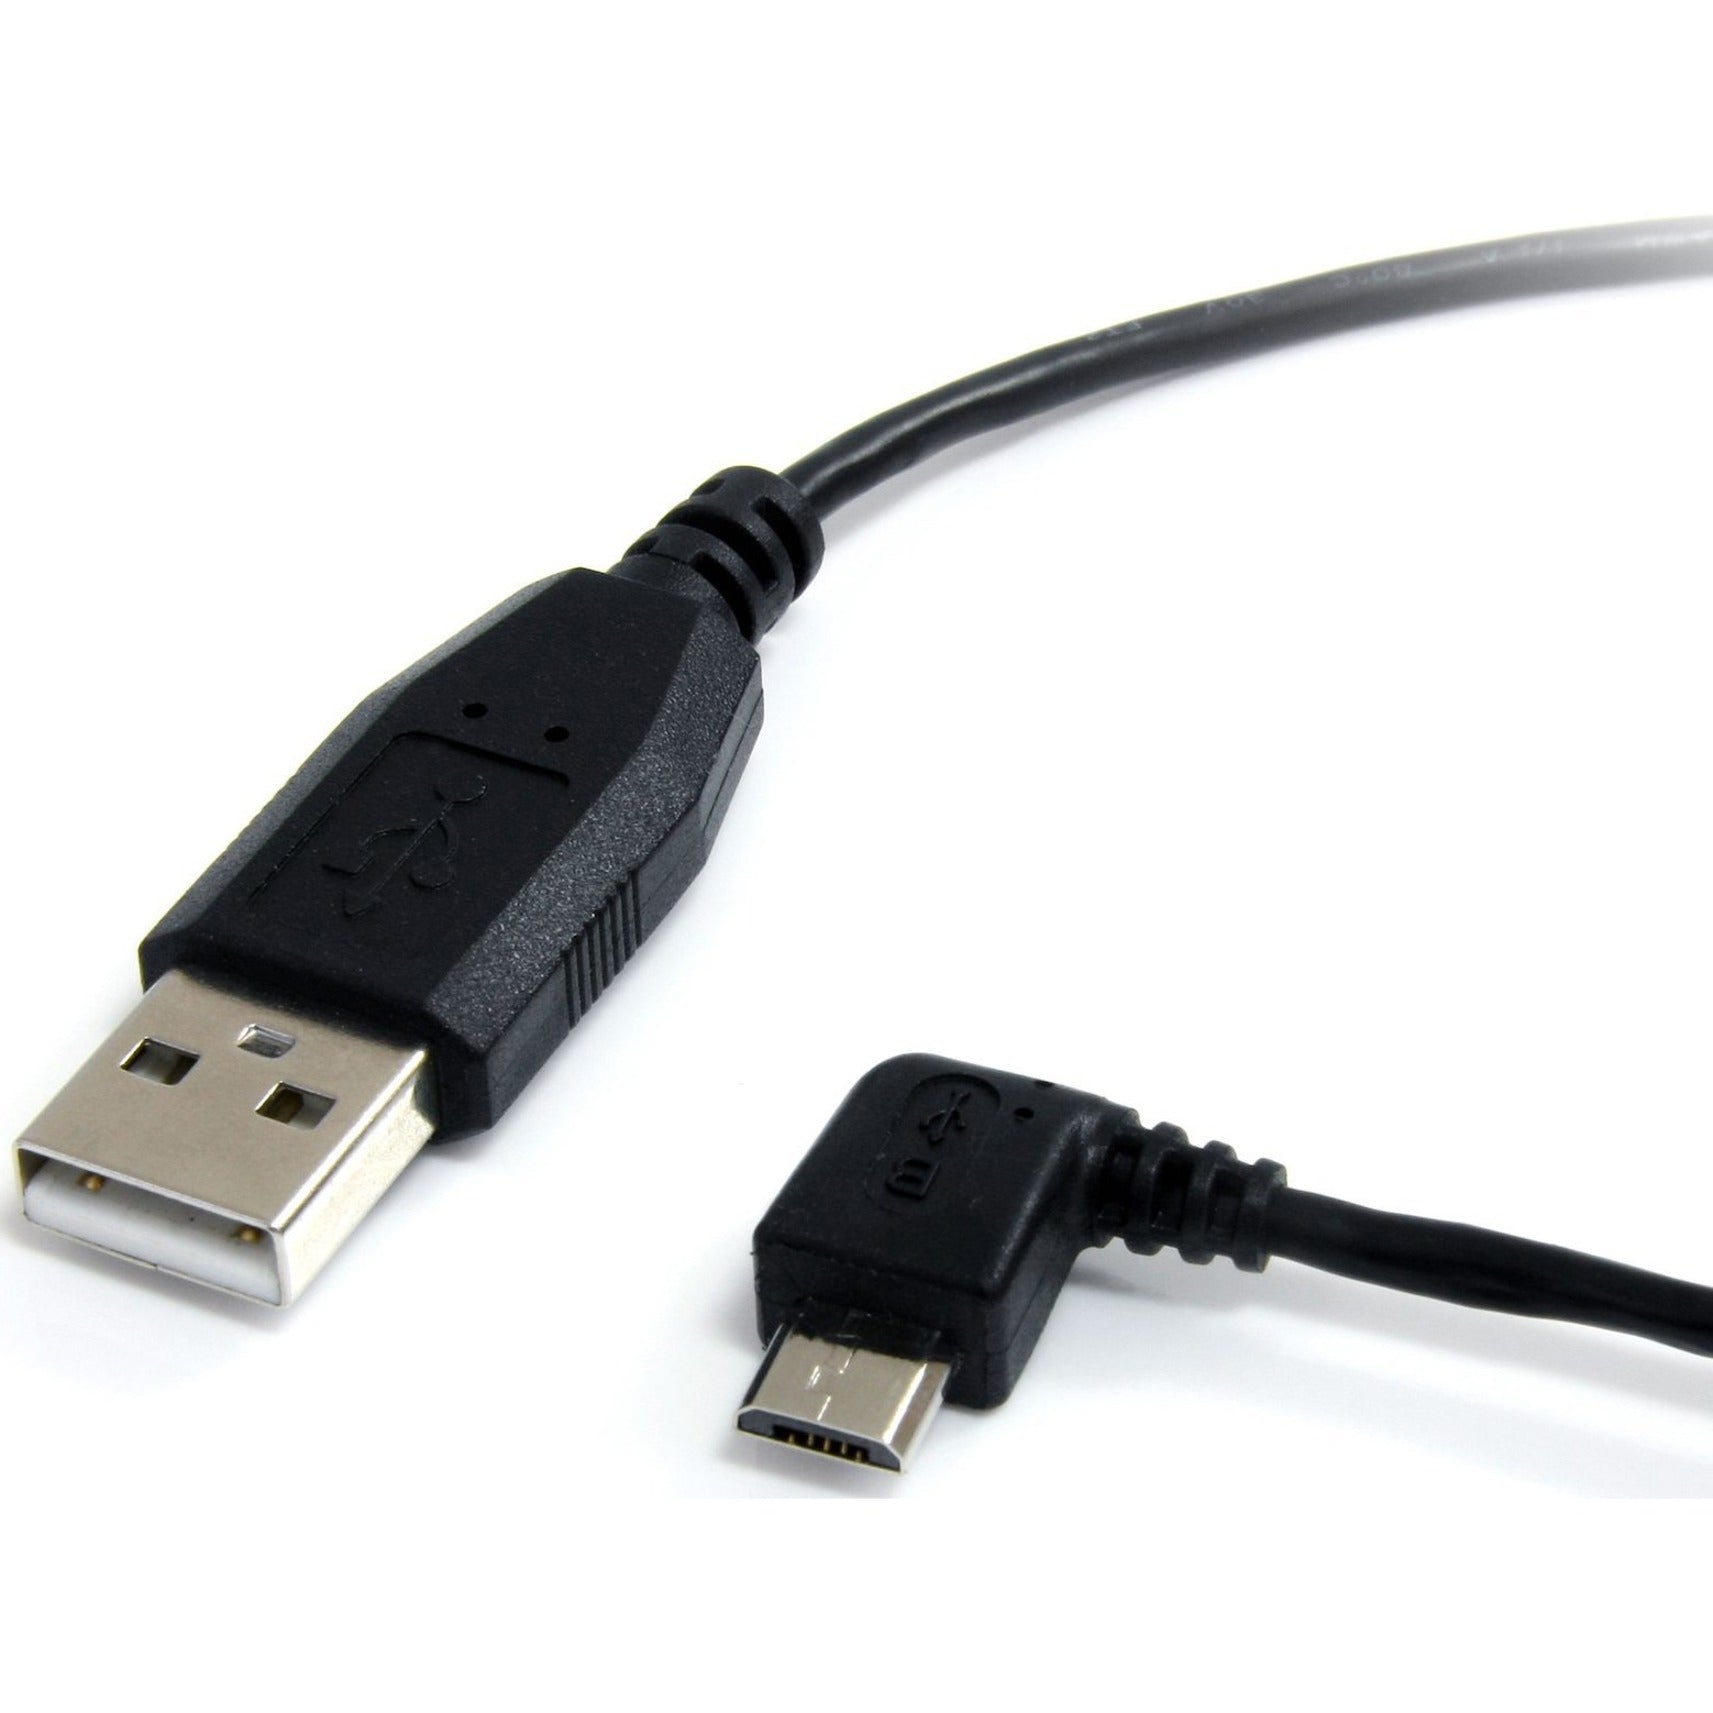 StarTech.com UUSBHAUB1LA 1 ft Micro USB Cable - A to Left Angle Micro B, Charging and Data Transfer, Black